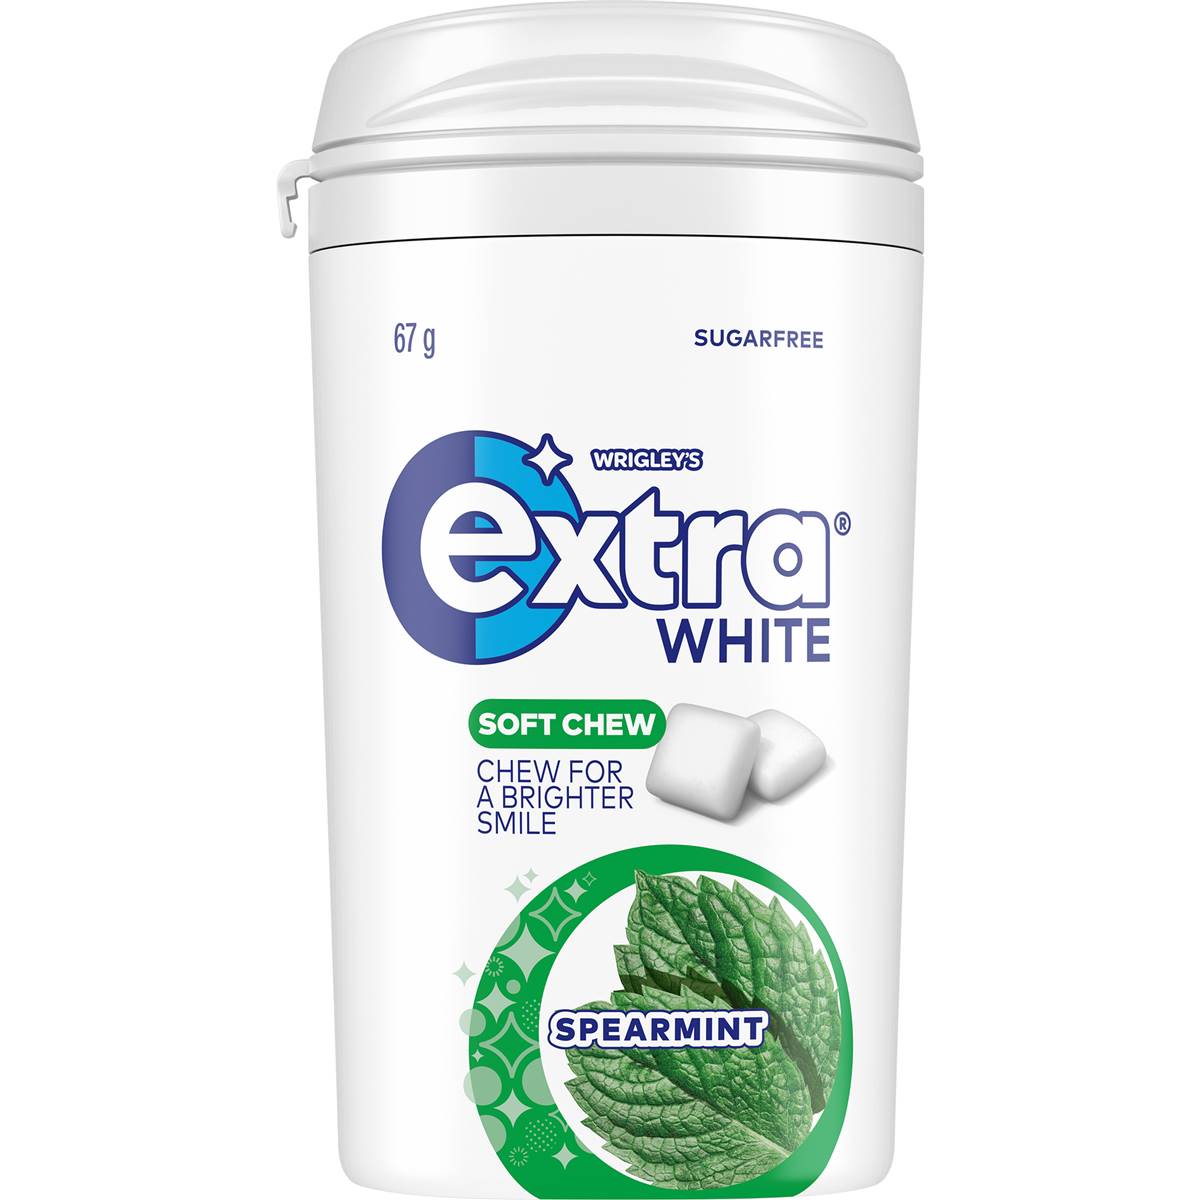 Calories in Extra Soft Chew White Spearmint Chewing Gum Sugar Free Bottle